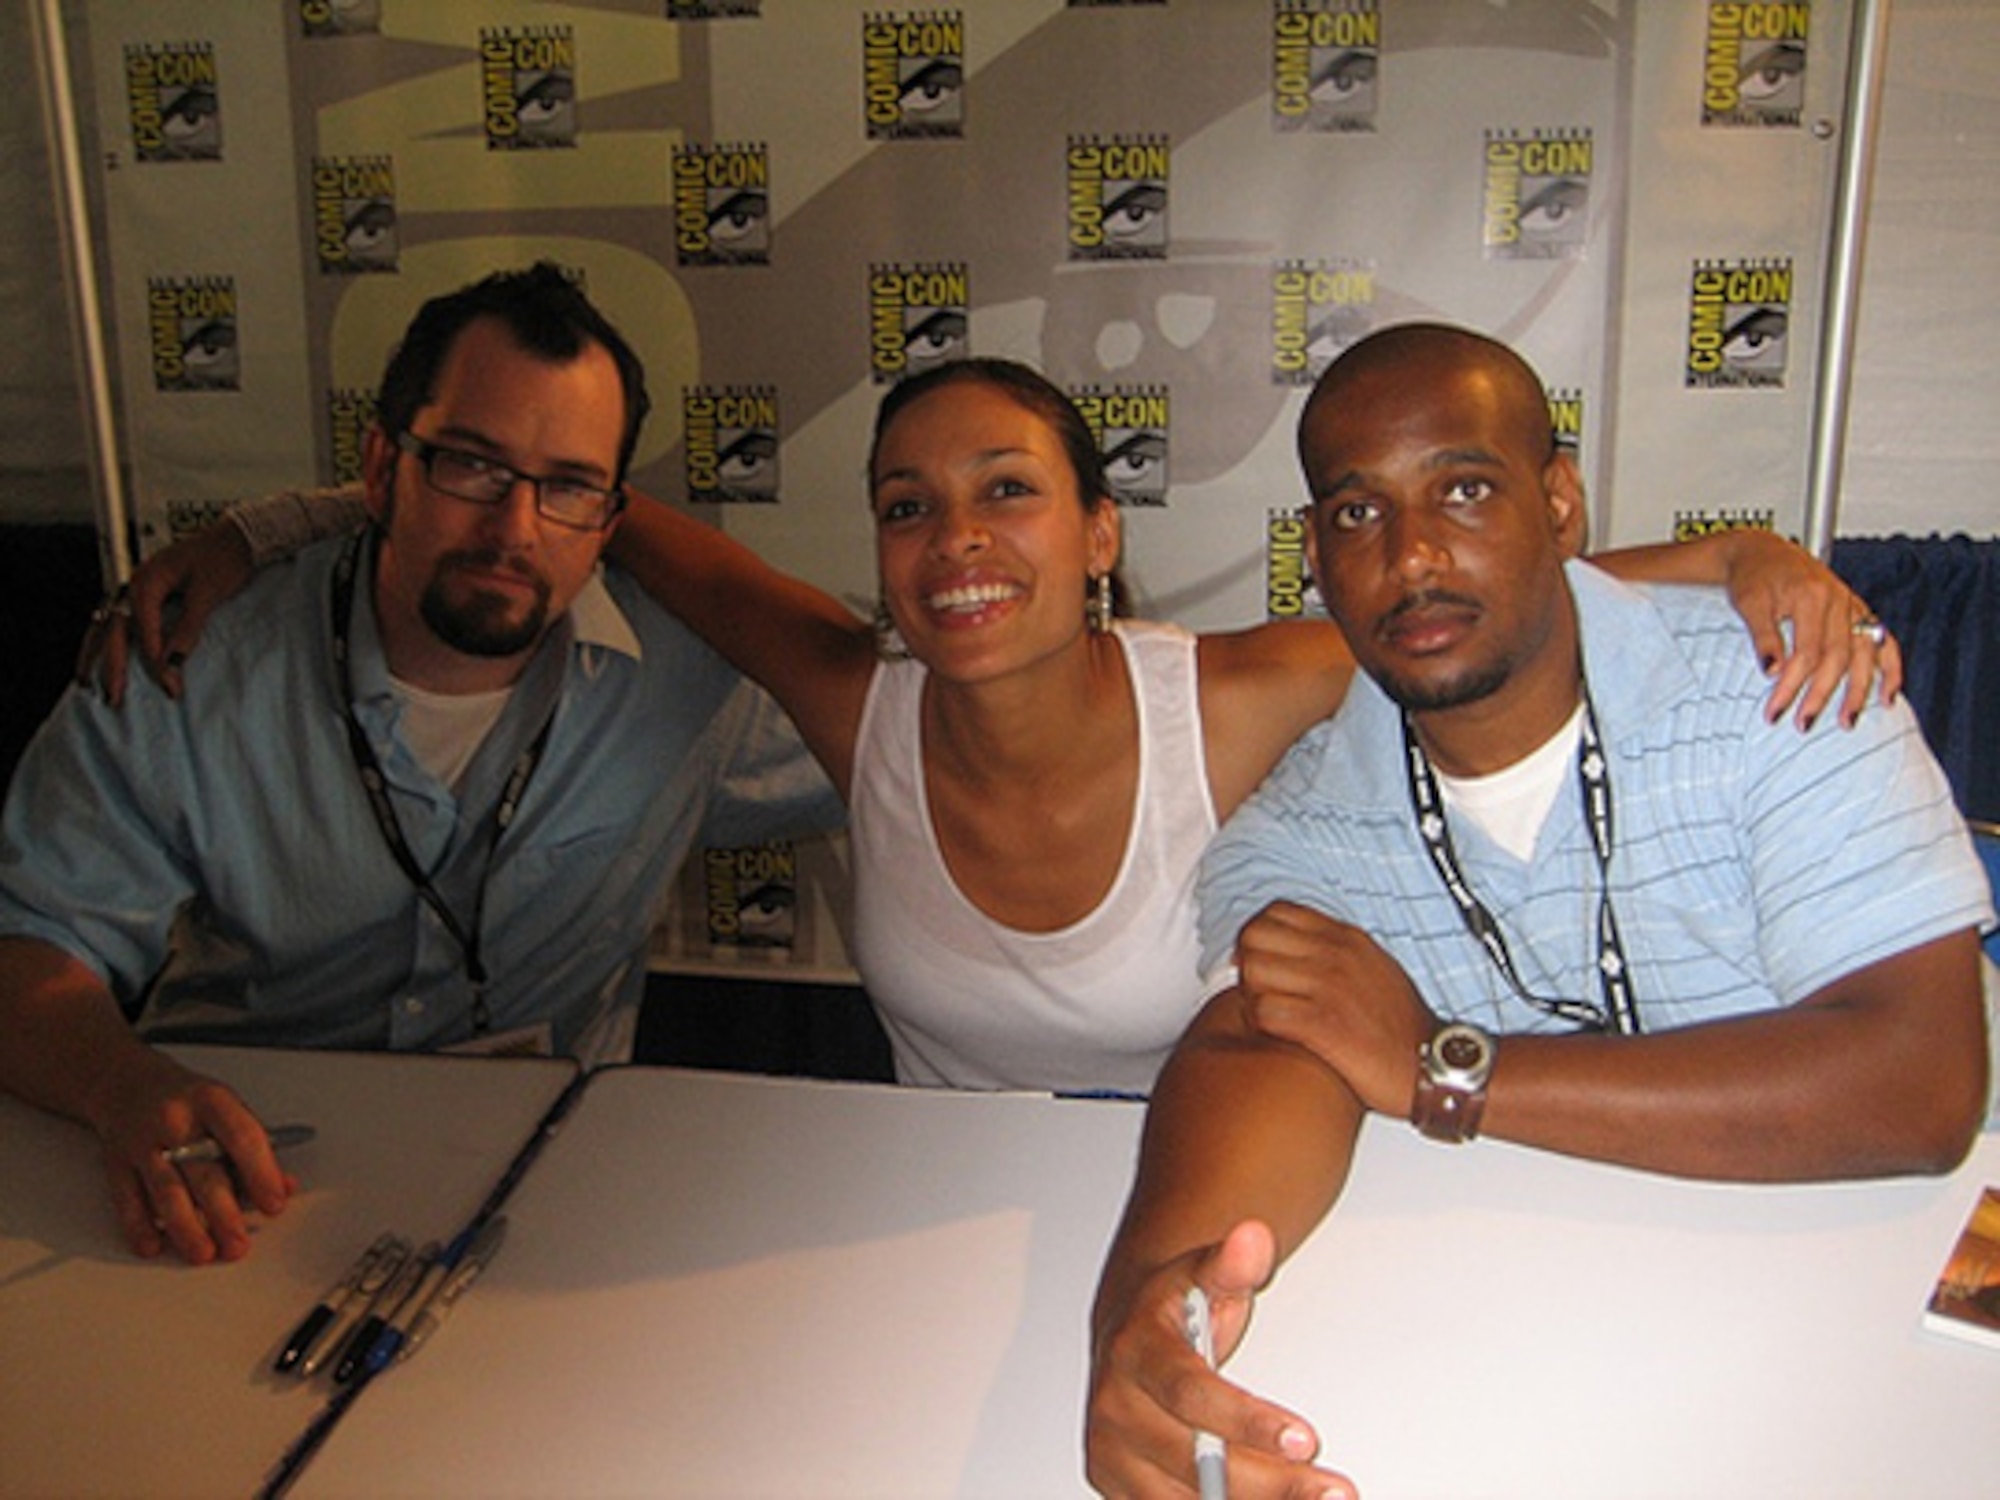 The creative team behind the "Occult Crimes Task Force", writer David Atchison (right), comic book writer and actress Rosario Dawson (center) and illustrator Tony Shasteen during a signing at Comic-Con. (Photo courtesy of David Atchison)